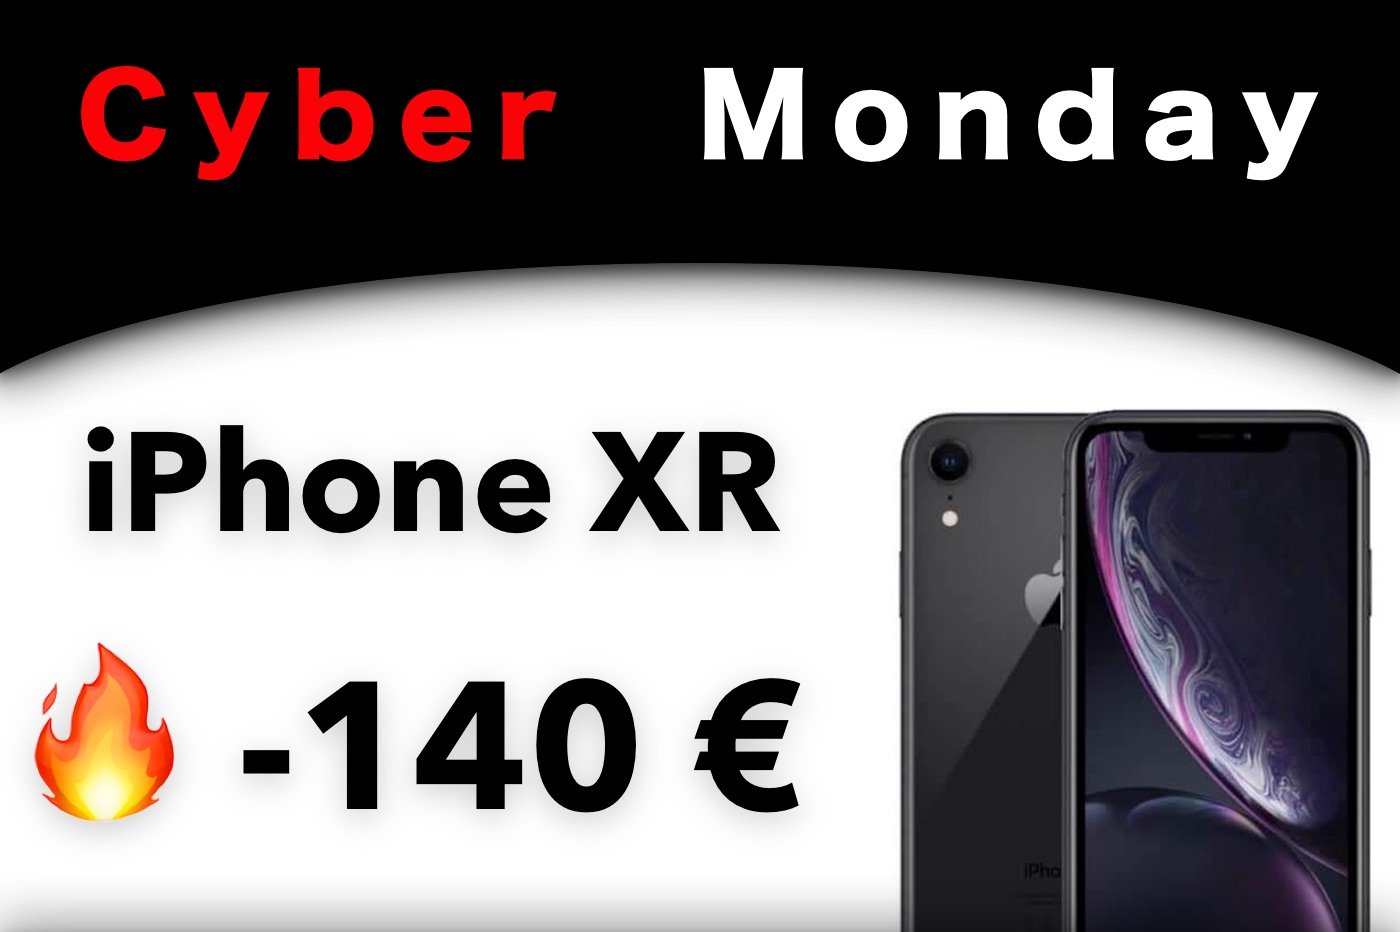 Cyber Monday iPhone XR